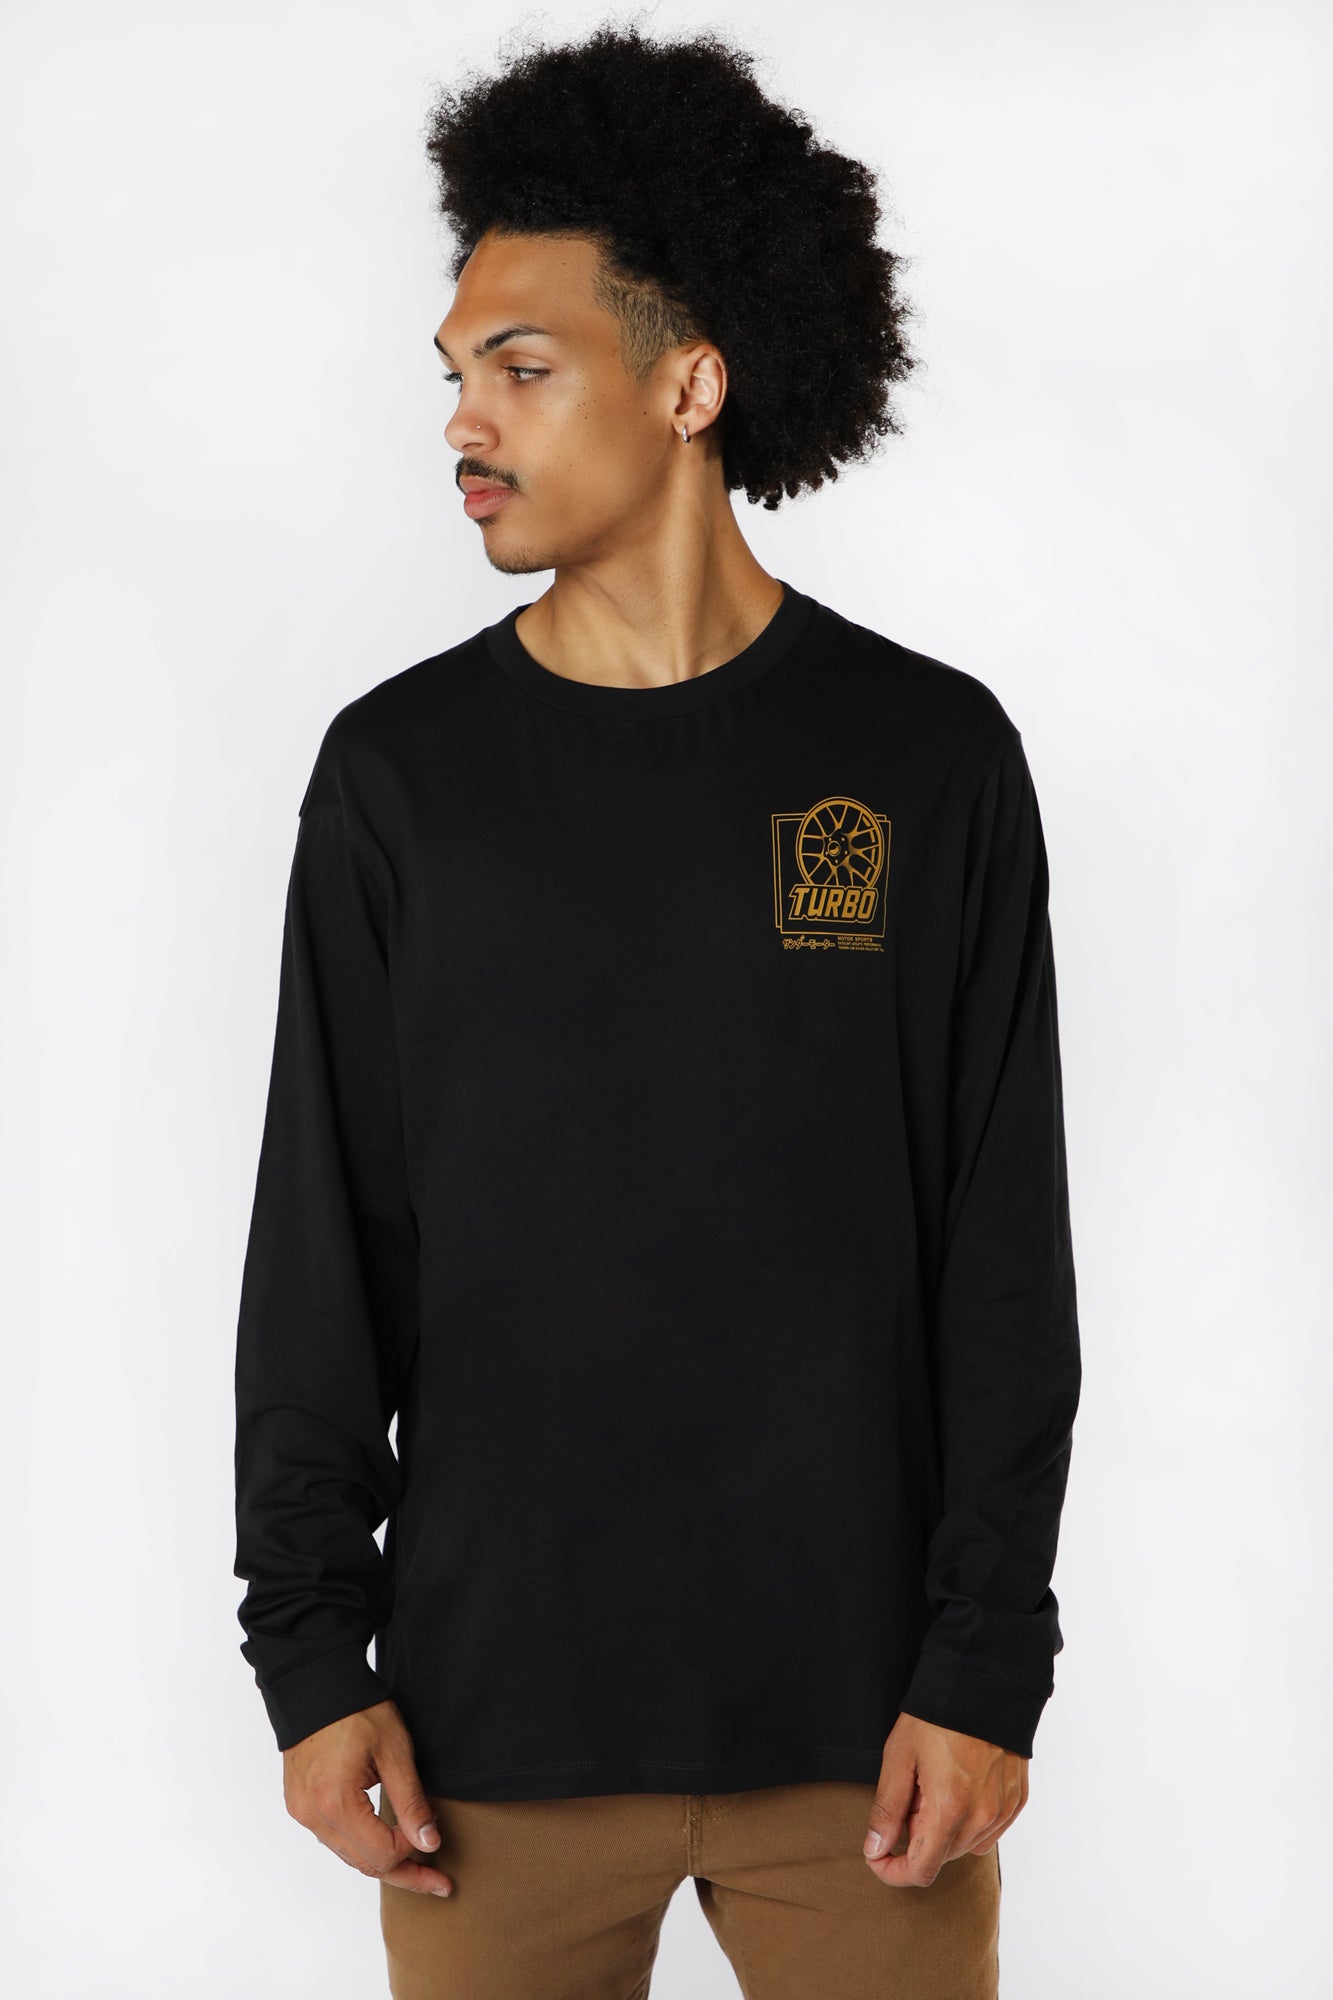 West49 Mens Graphic Turbo Long Sleeve Top - Black /